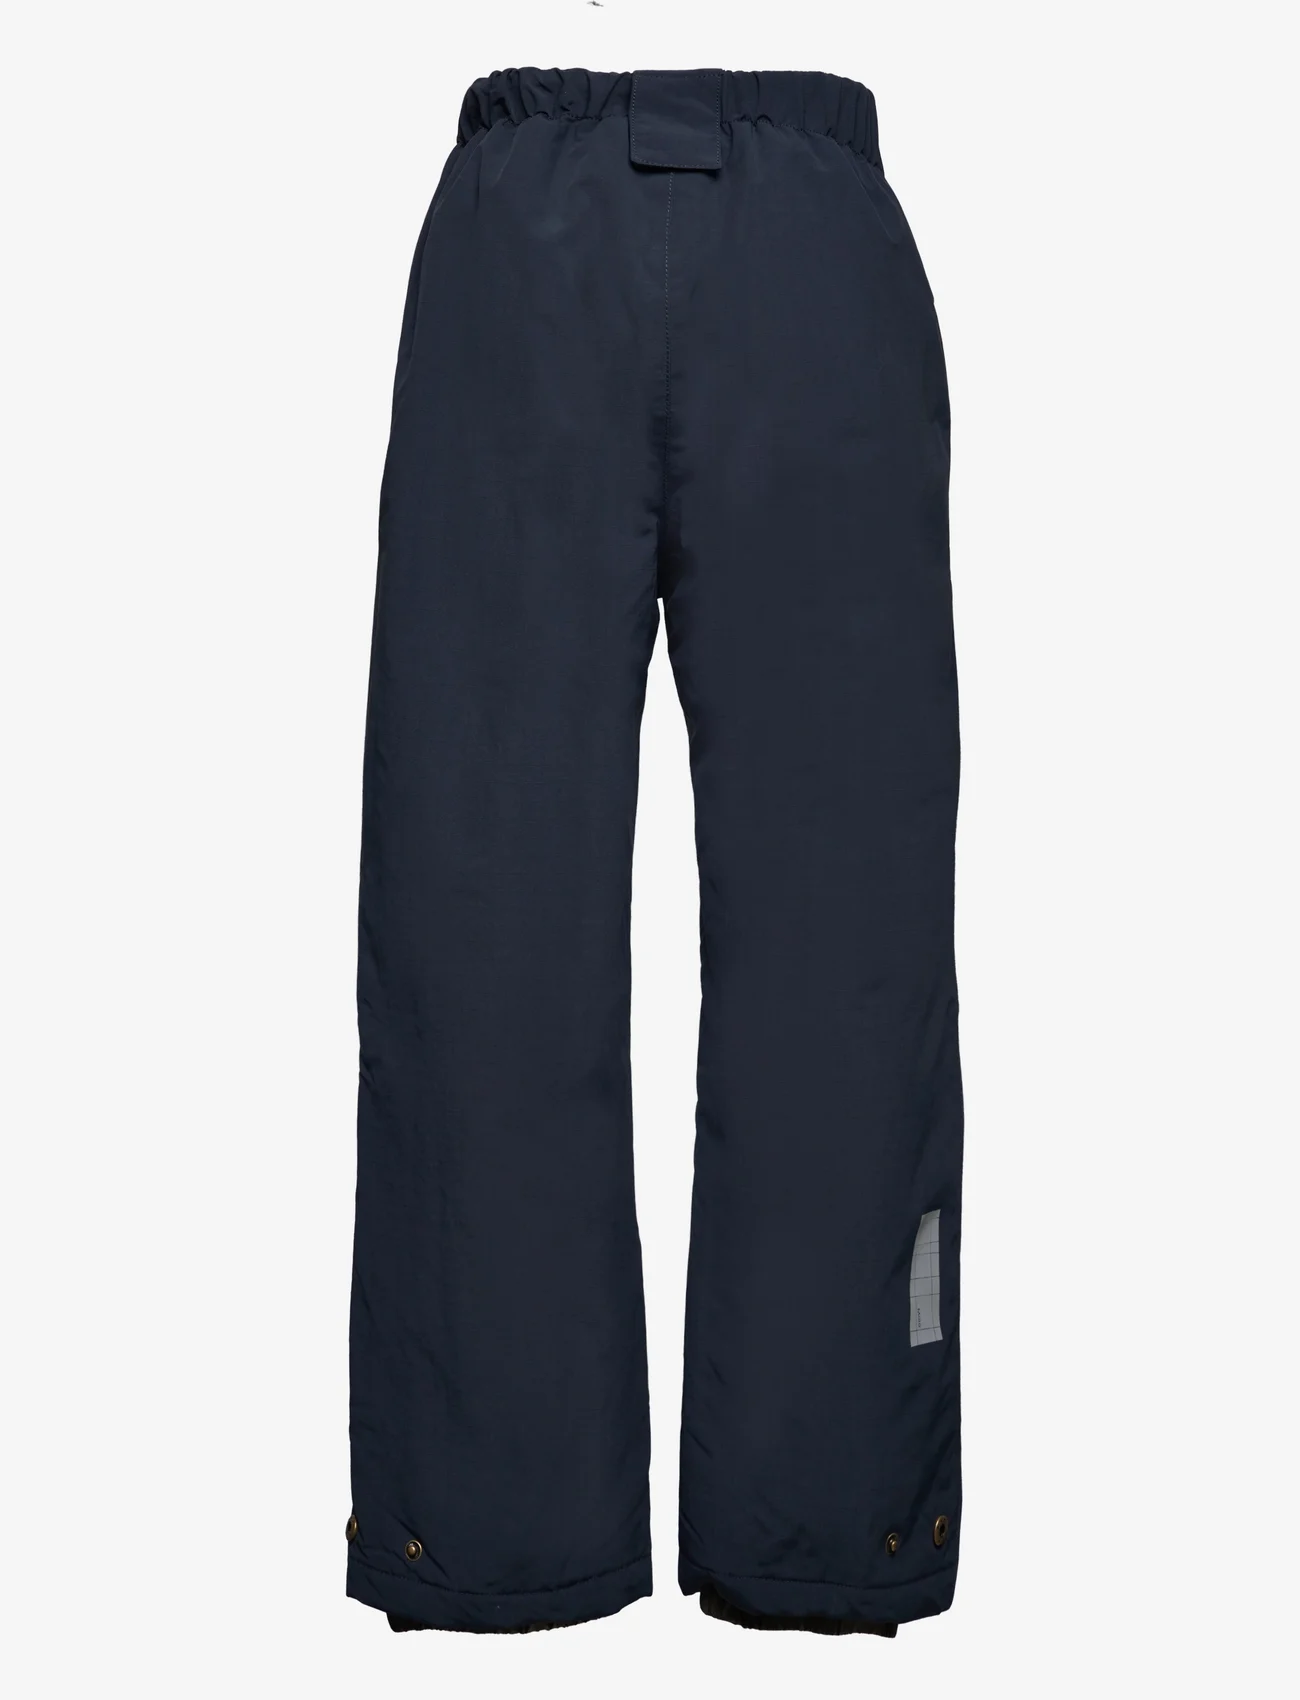 Molo - Paxton - winter trousers - night navy - 1